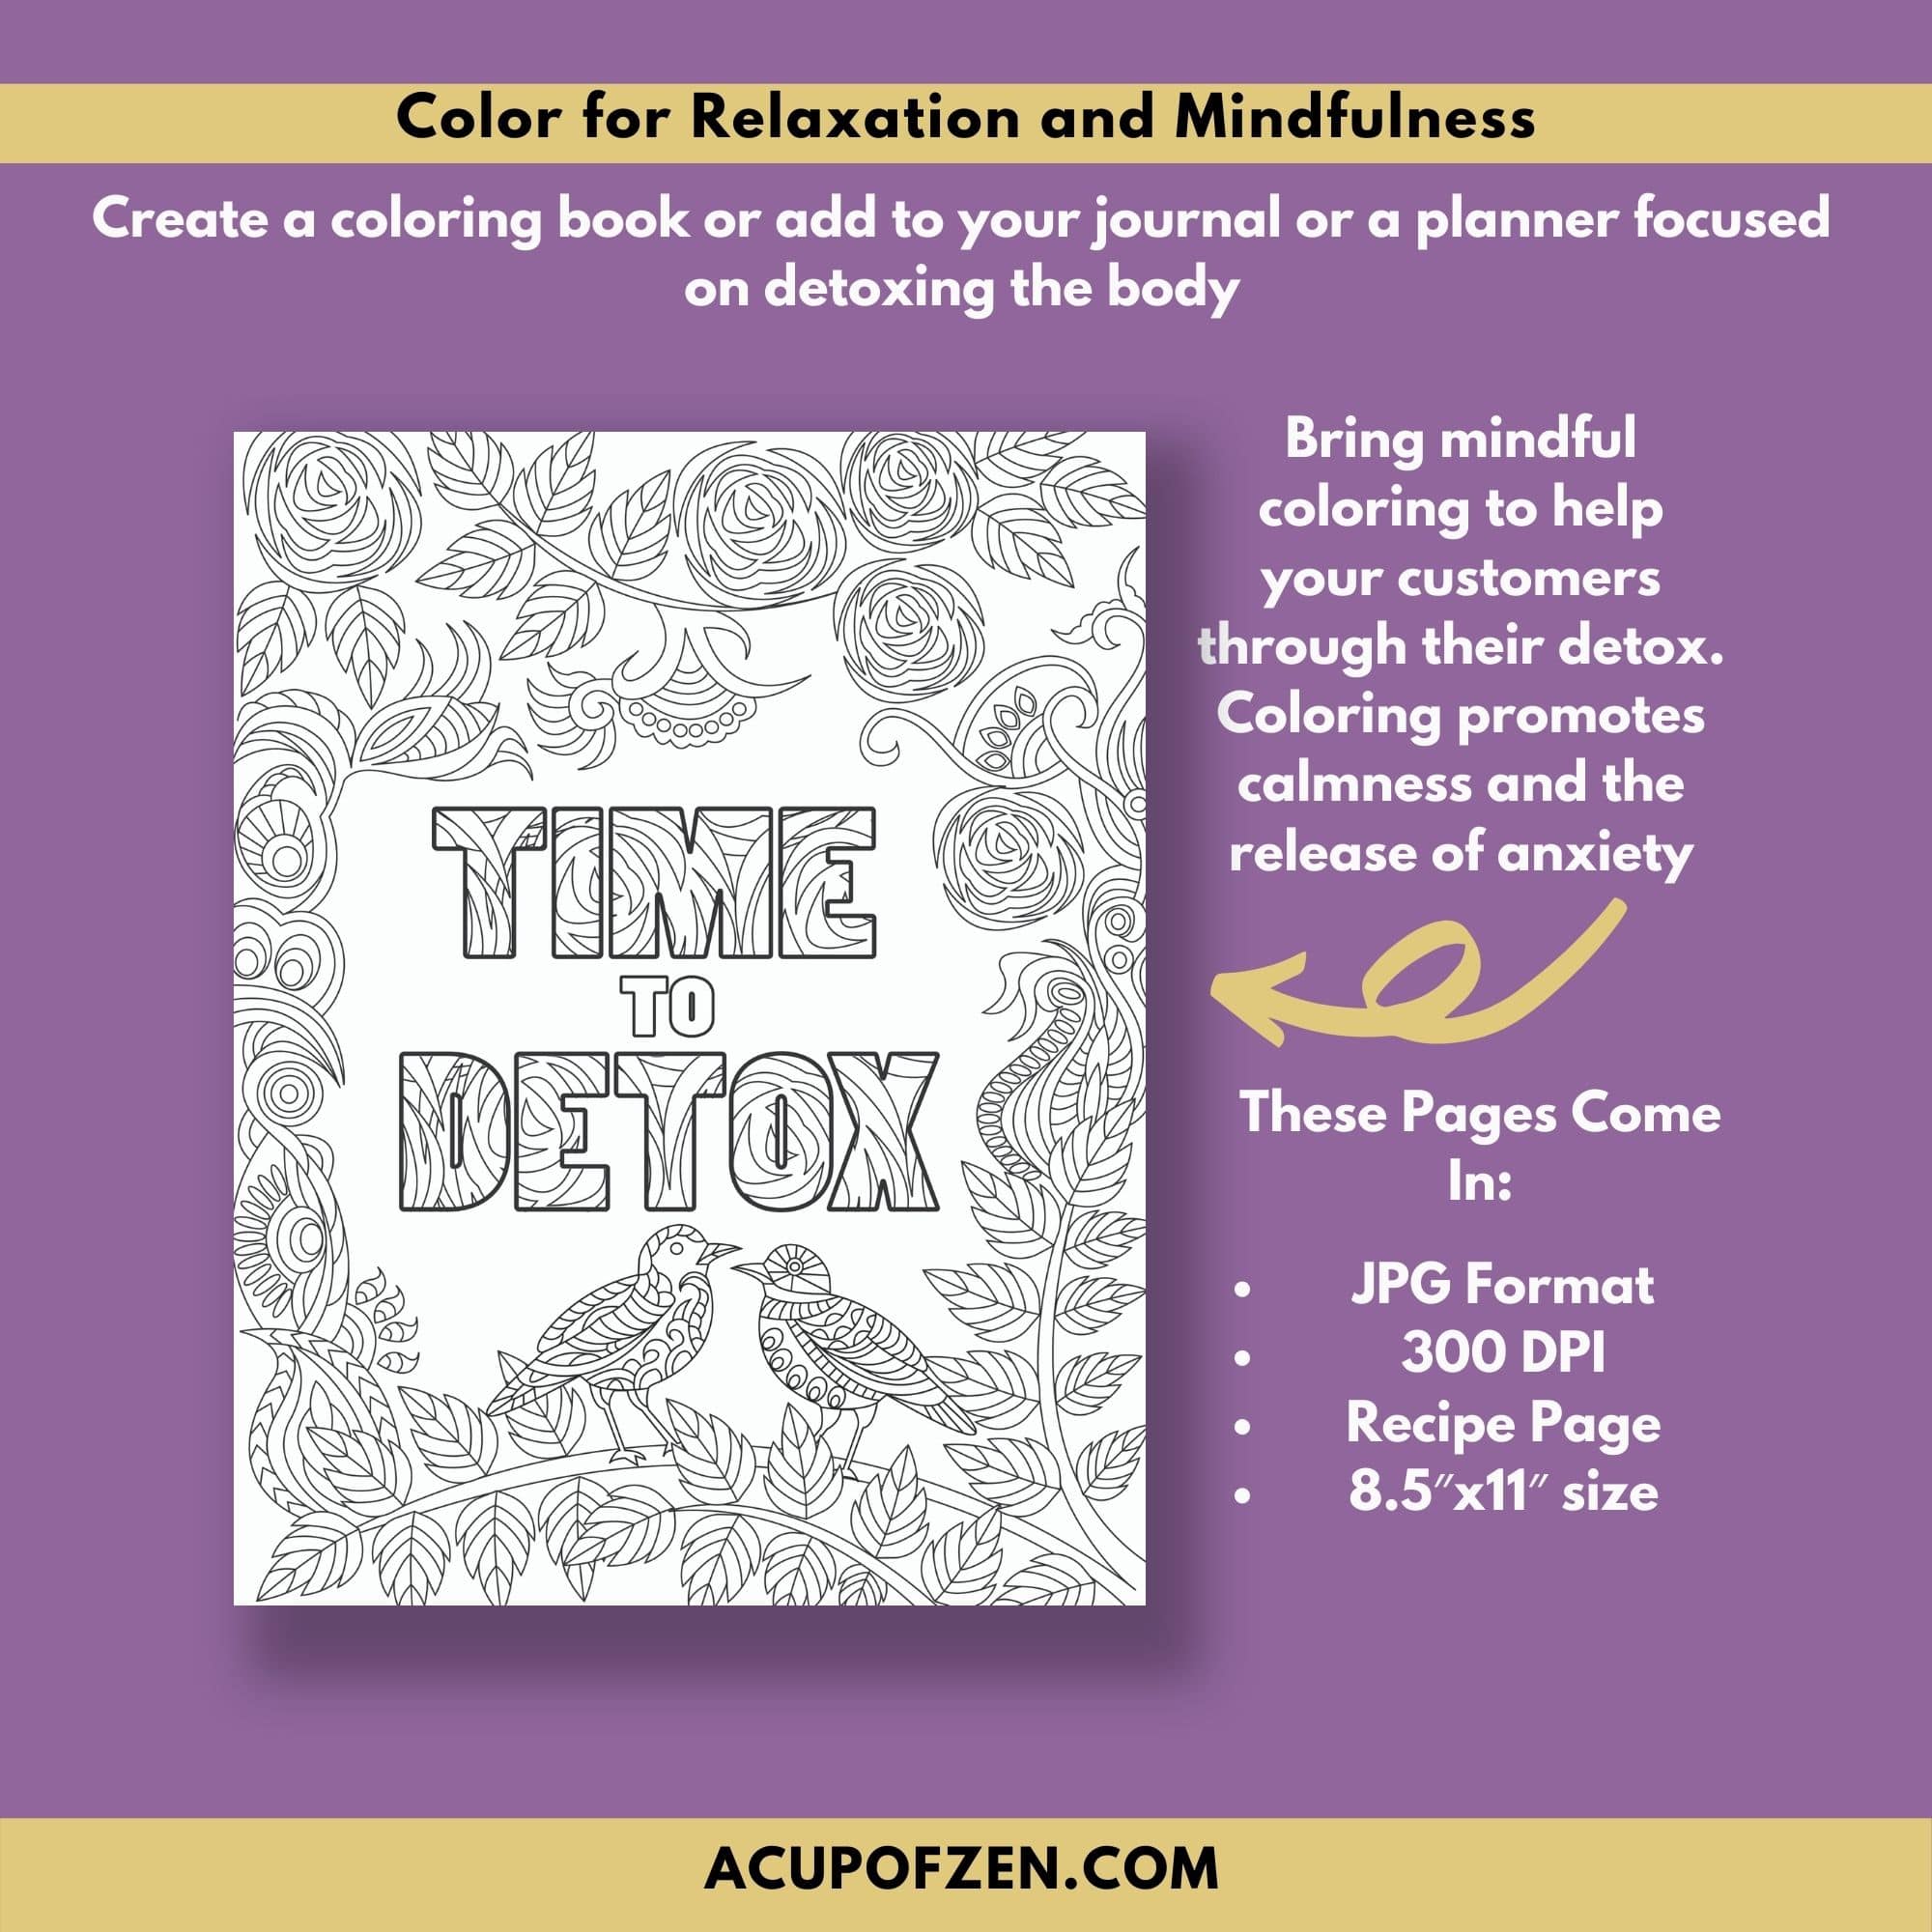 Detox Your Body Coloring Pages